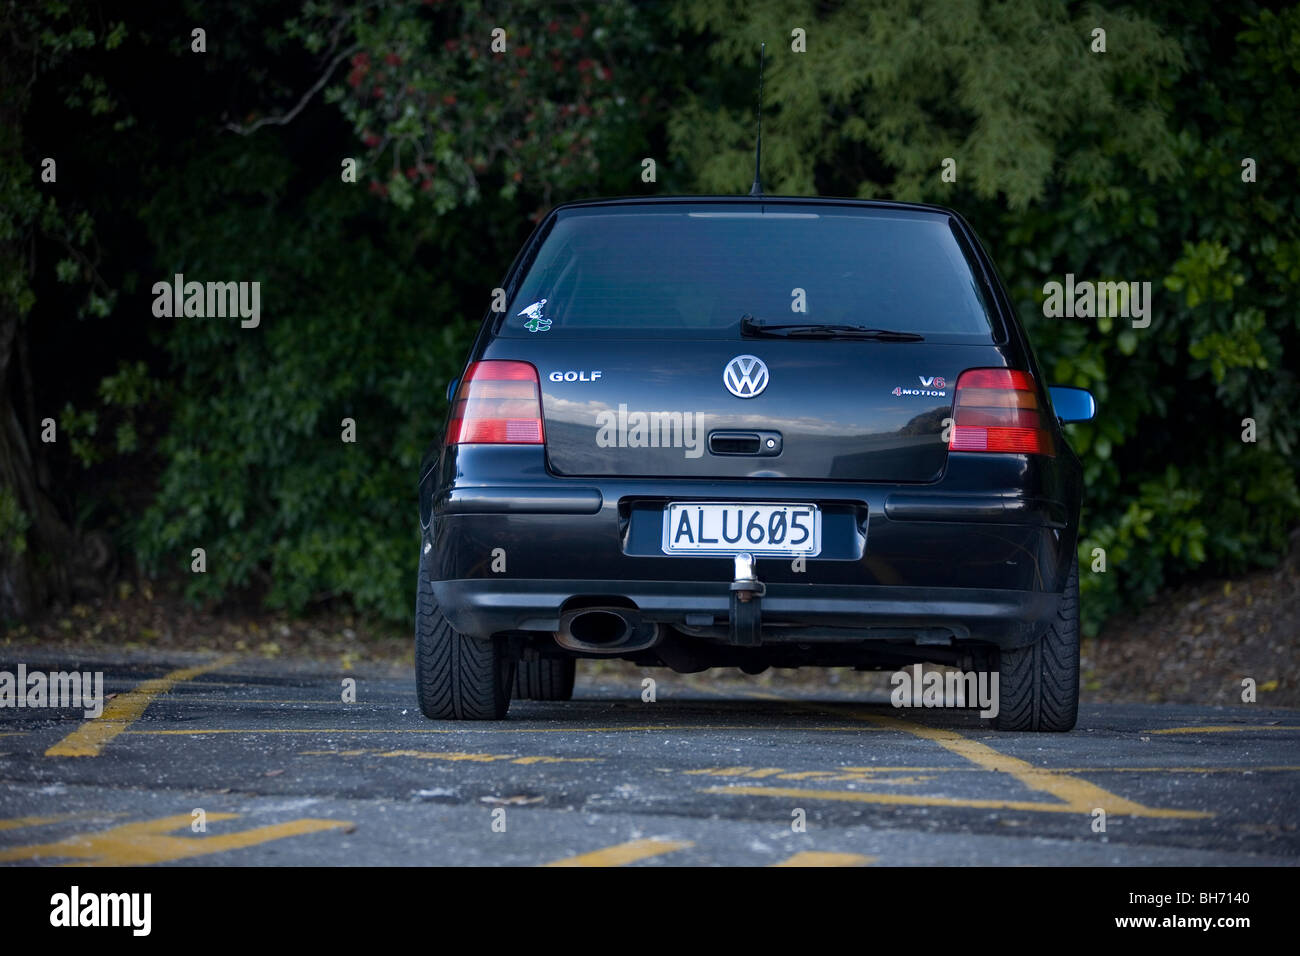 2002 Black Volkswagen 2.8L. V6 6 speed manual 4motion Golf with R32 18inch rims Stock Photo